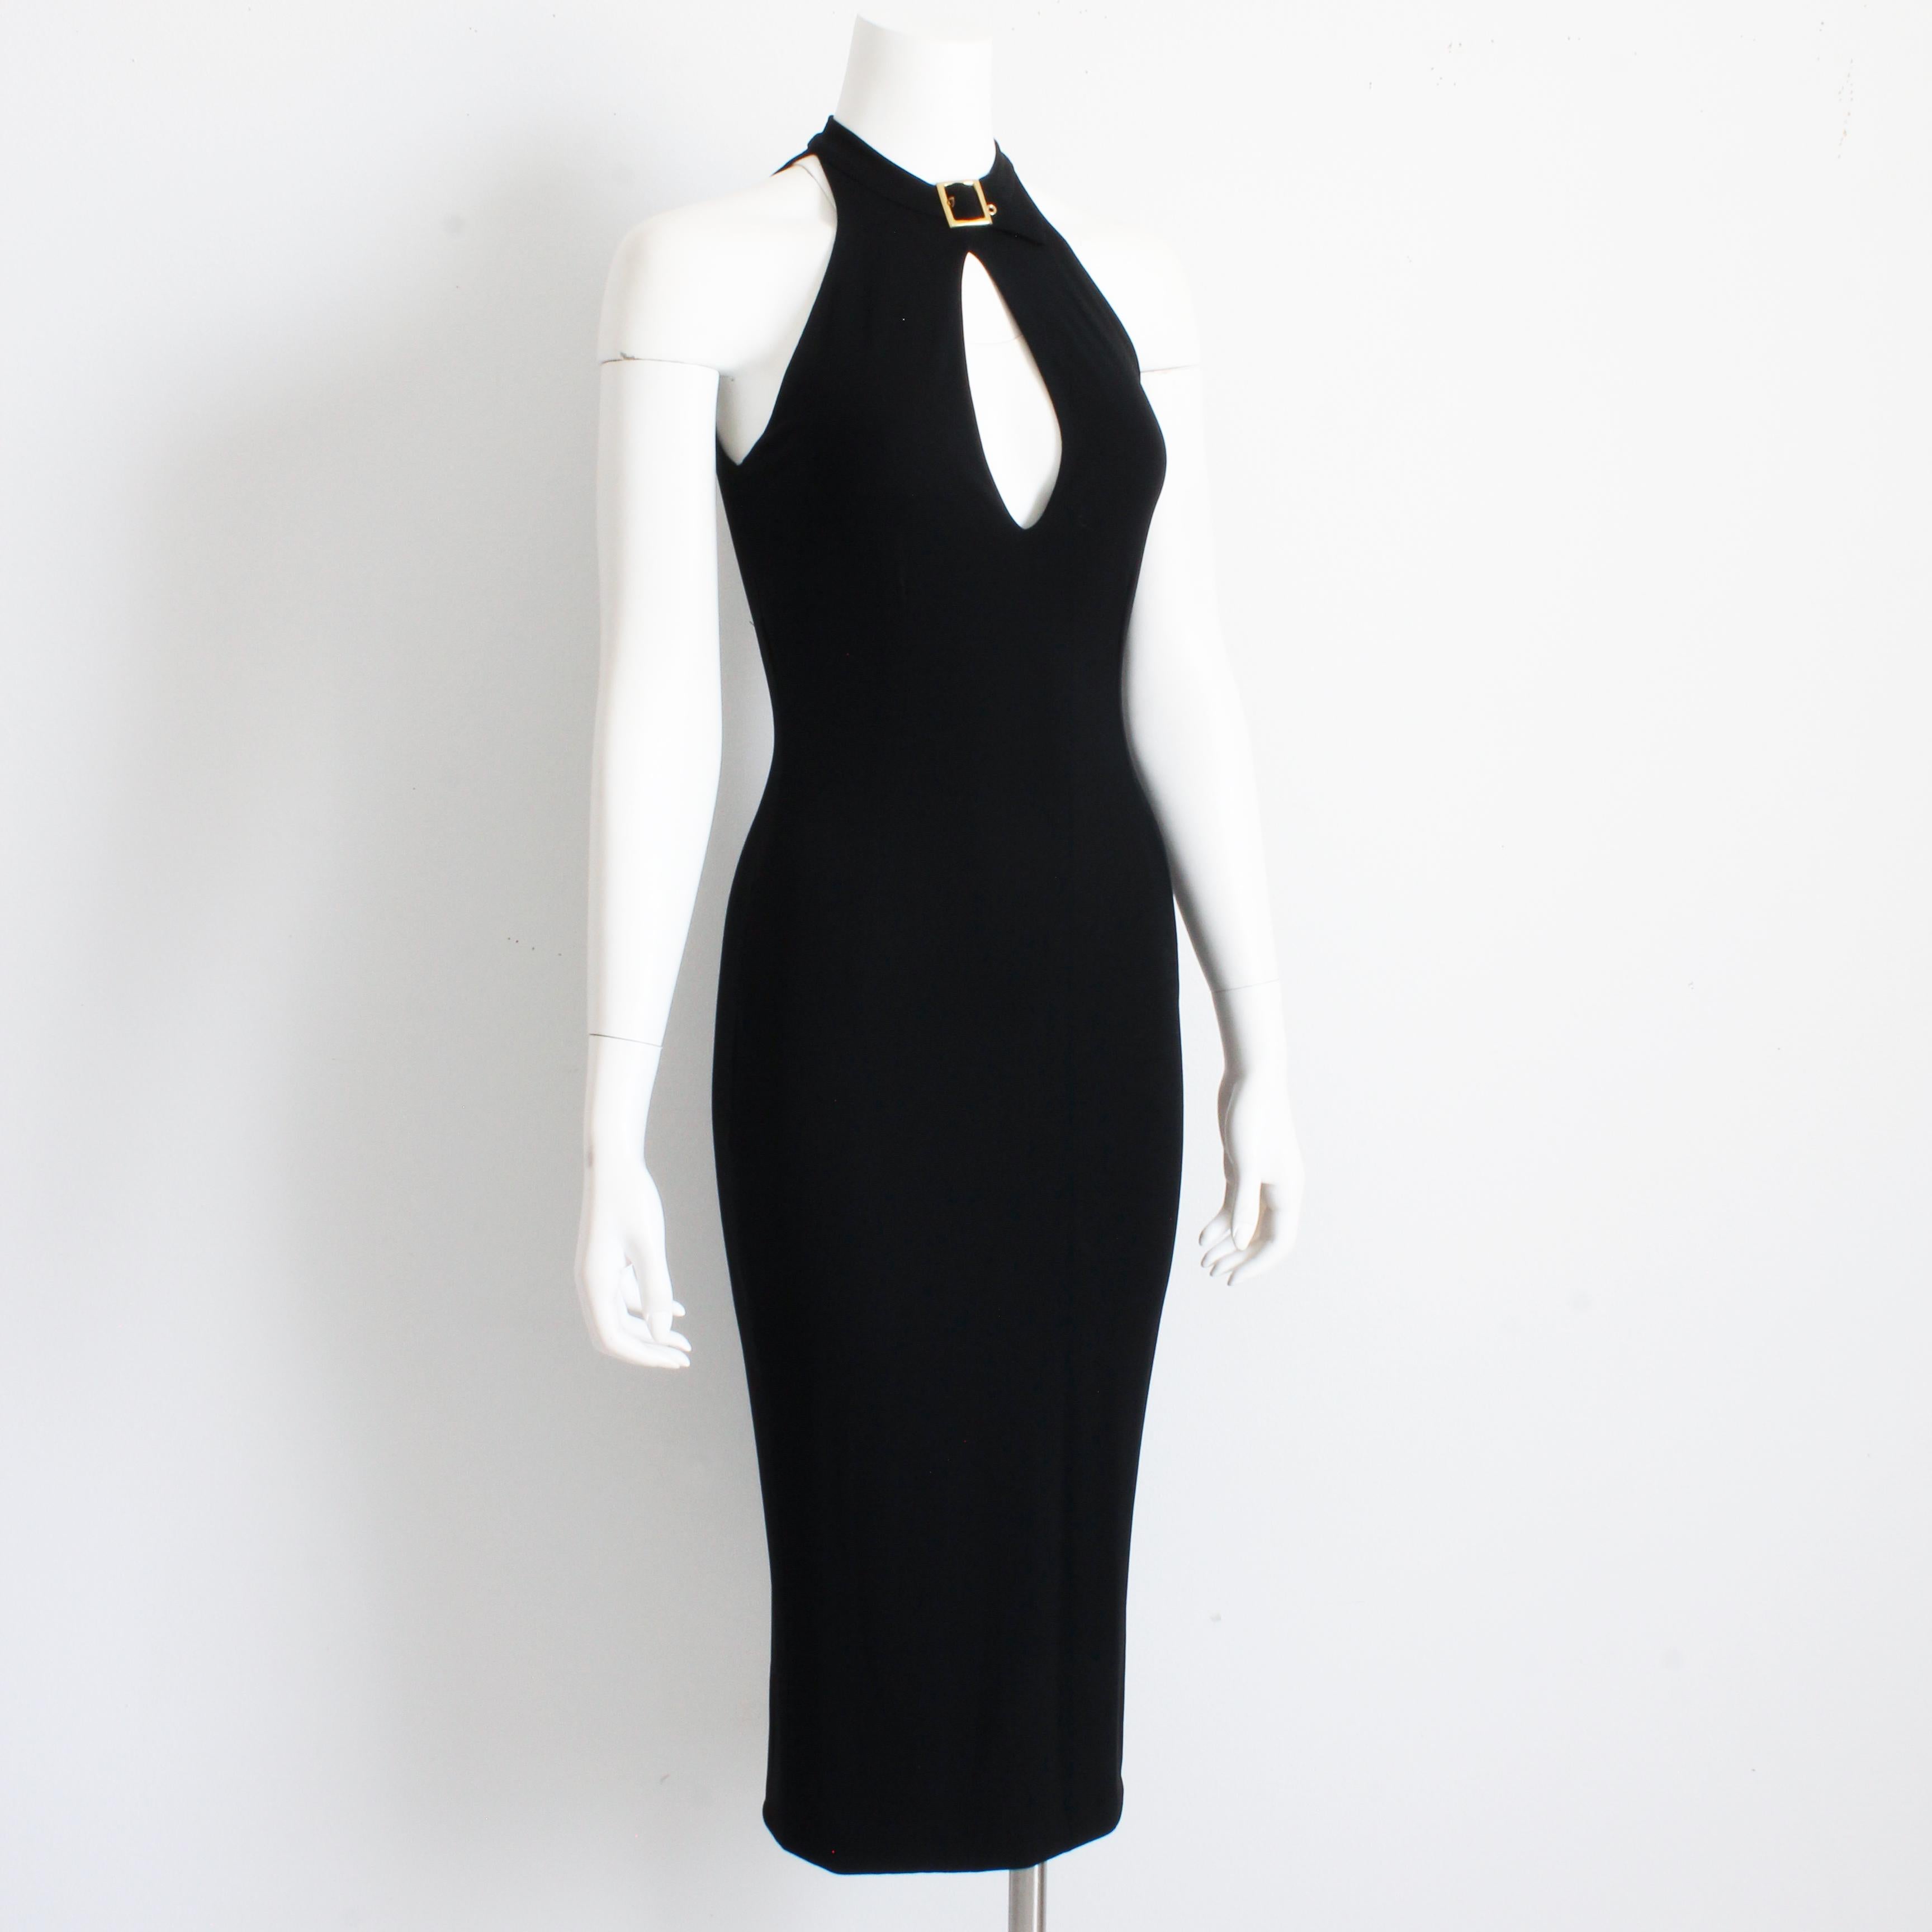 Dolce & Gabbana Dress Buckle Collar Keyhole Chest Black Jersey Wiggle Bodycon  In Good Condition For Sale In Port Saint Lucie, FL